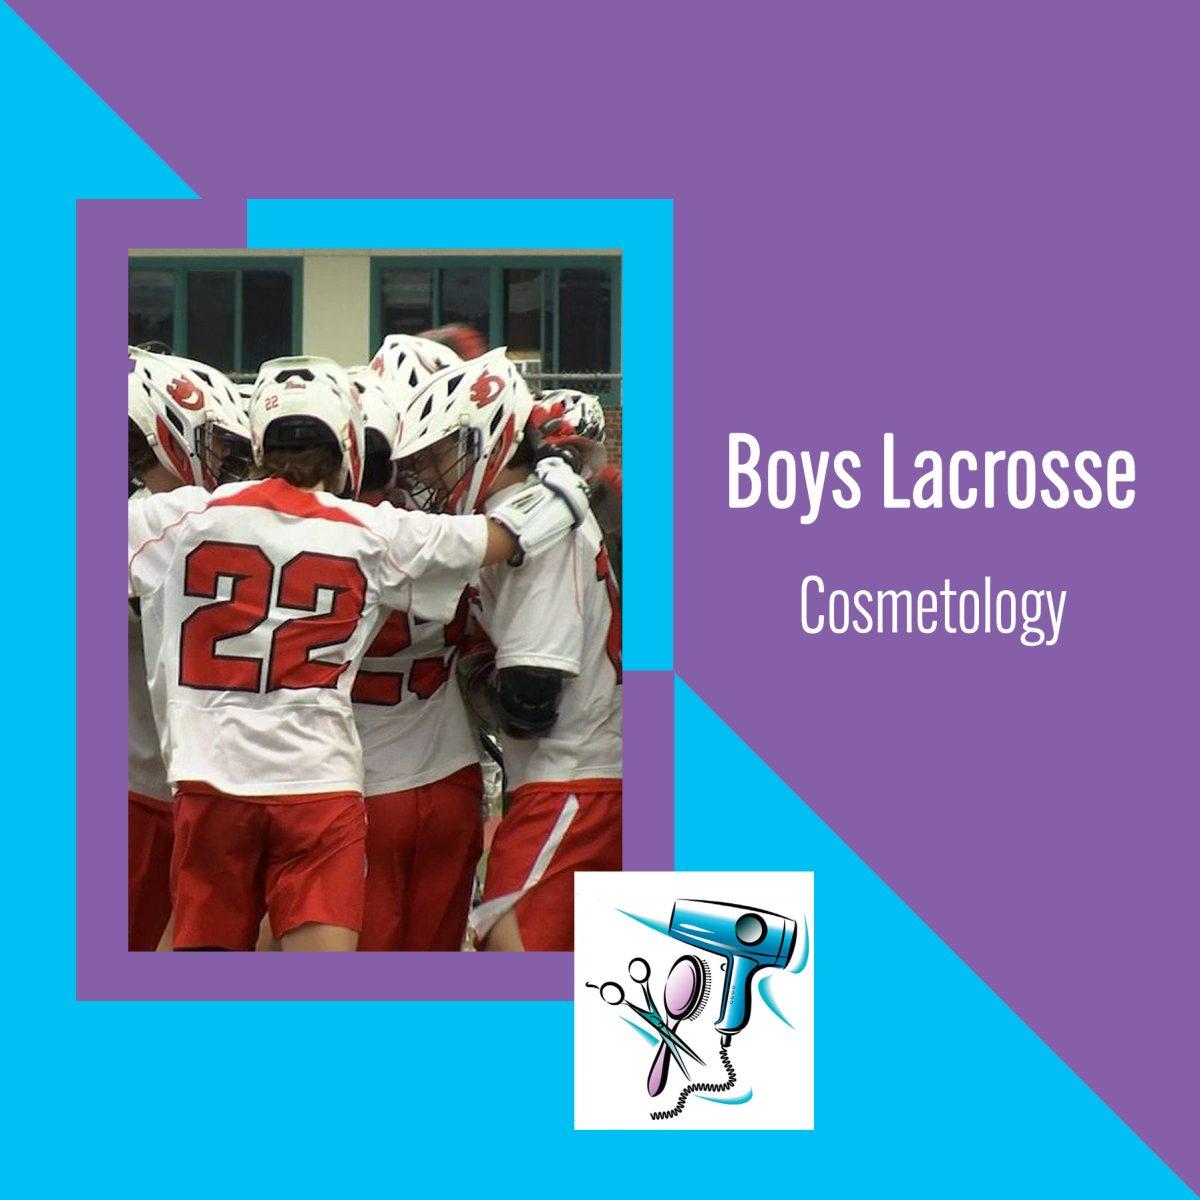 Boys Lacrosse Players Excited to Pursue Future Careers in Cosmetology